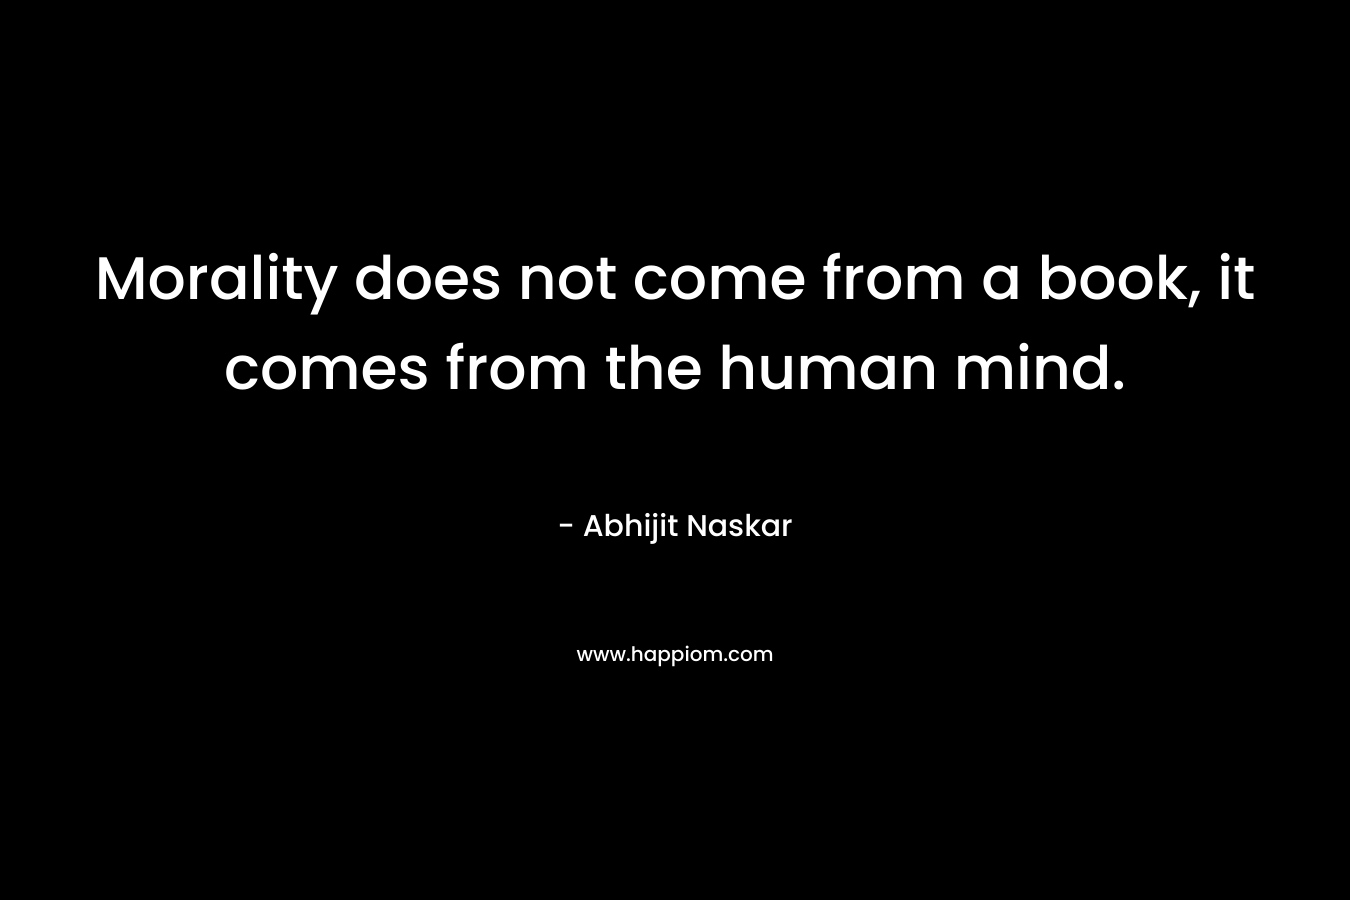 Morality does not come from a book, it comes from the human mind.